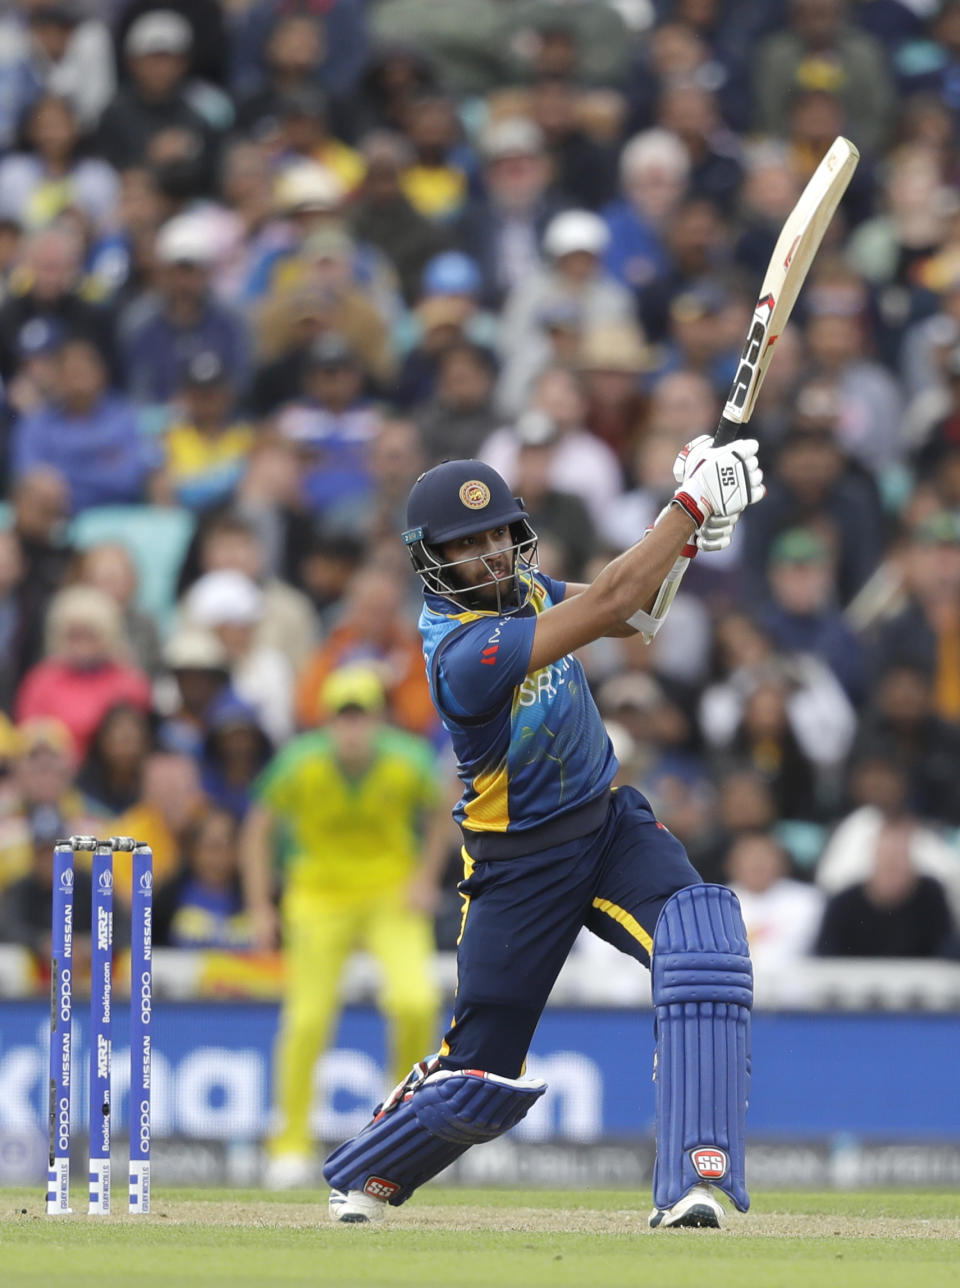 Sri Lanka's Kusal Mendis plays a shot for six off the bowling of Australia's Mitchell Starc during the World Cup cricket match between Sri Lanka and Australia at The Oval in London, Saturday, June 15, 2019. (AP Photo/Kirsty Wigglesworth)